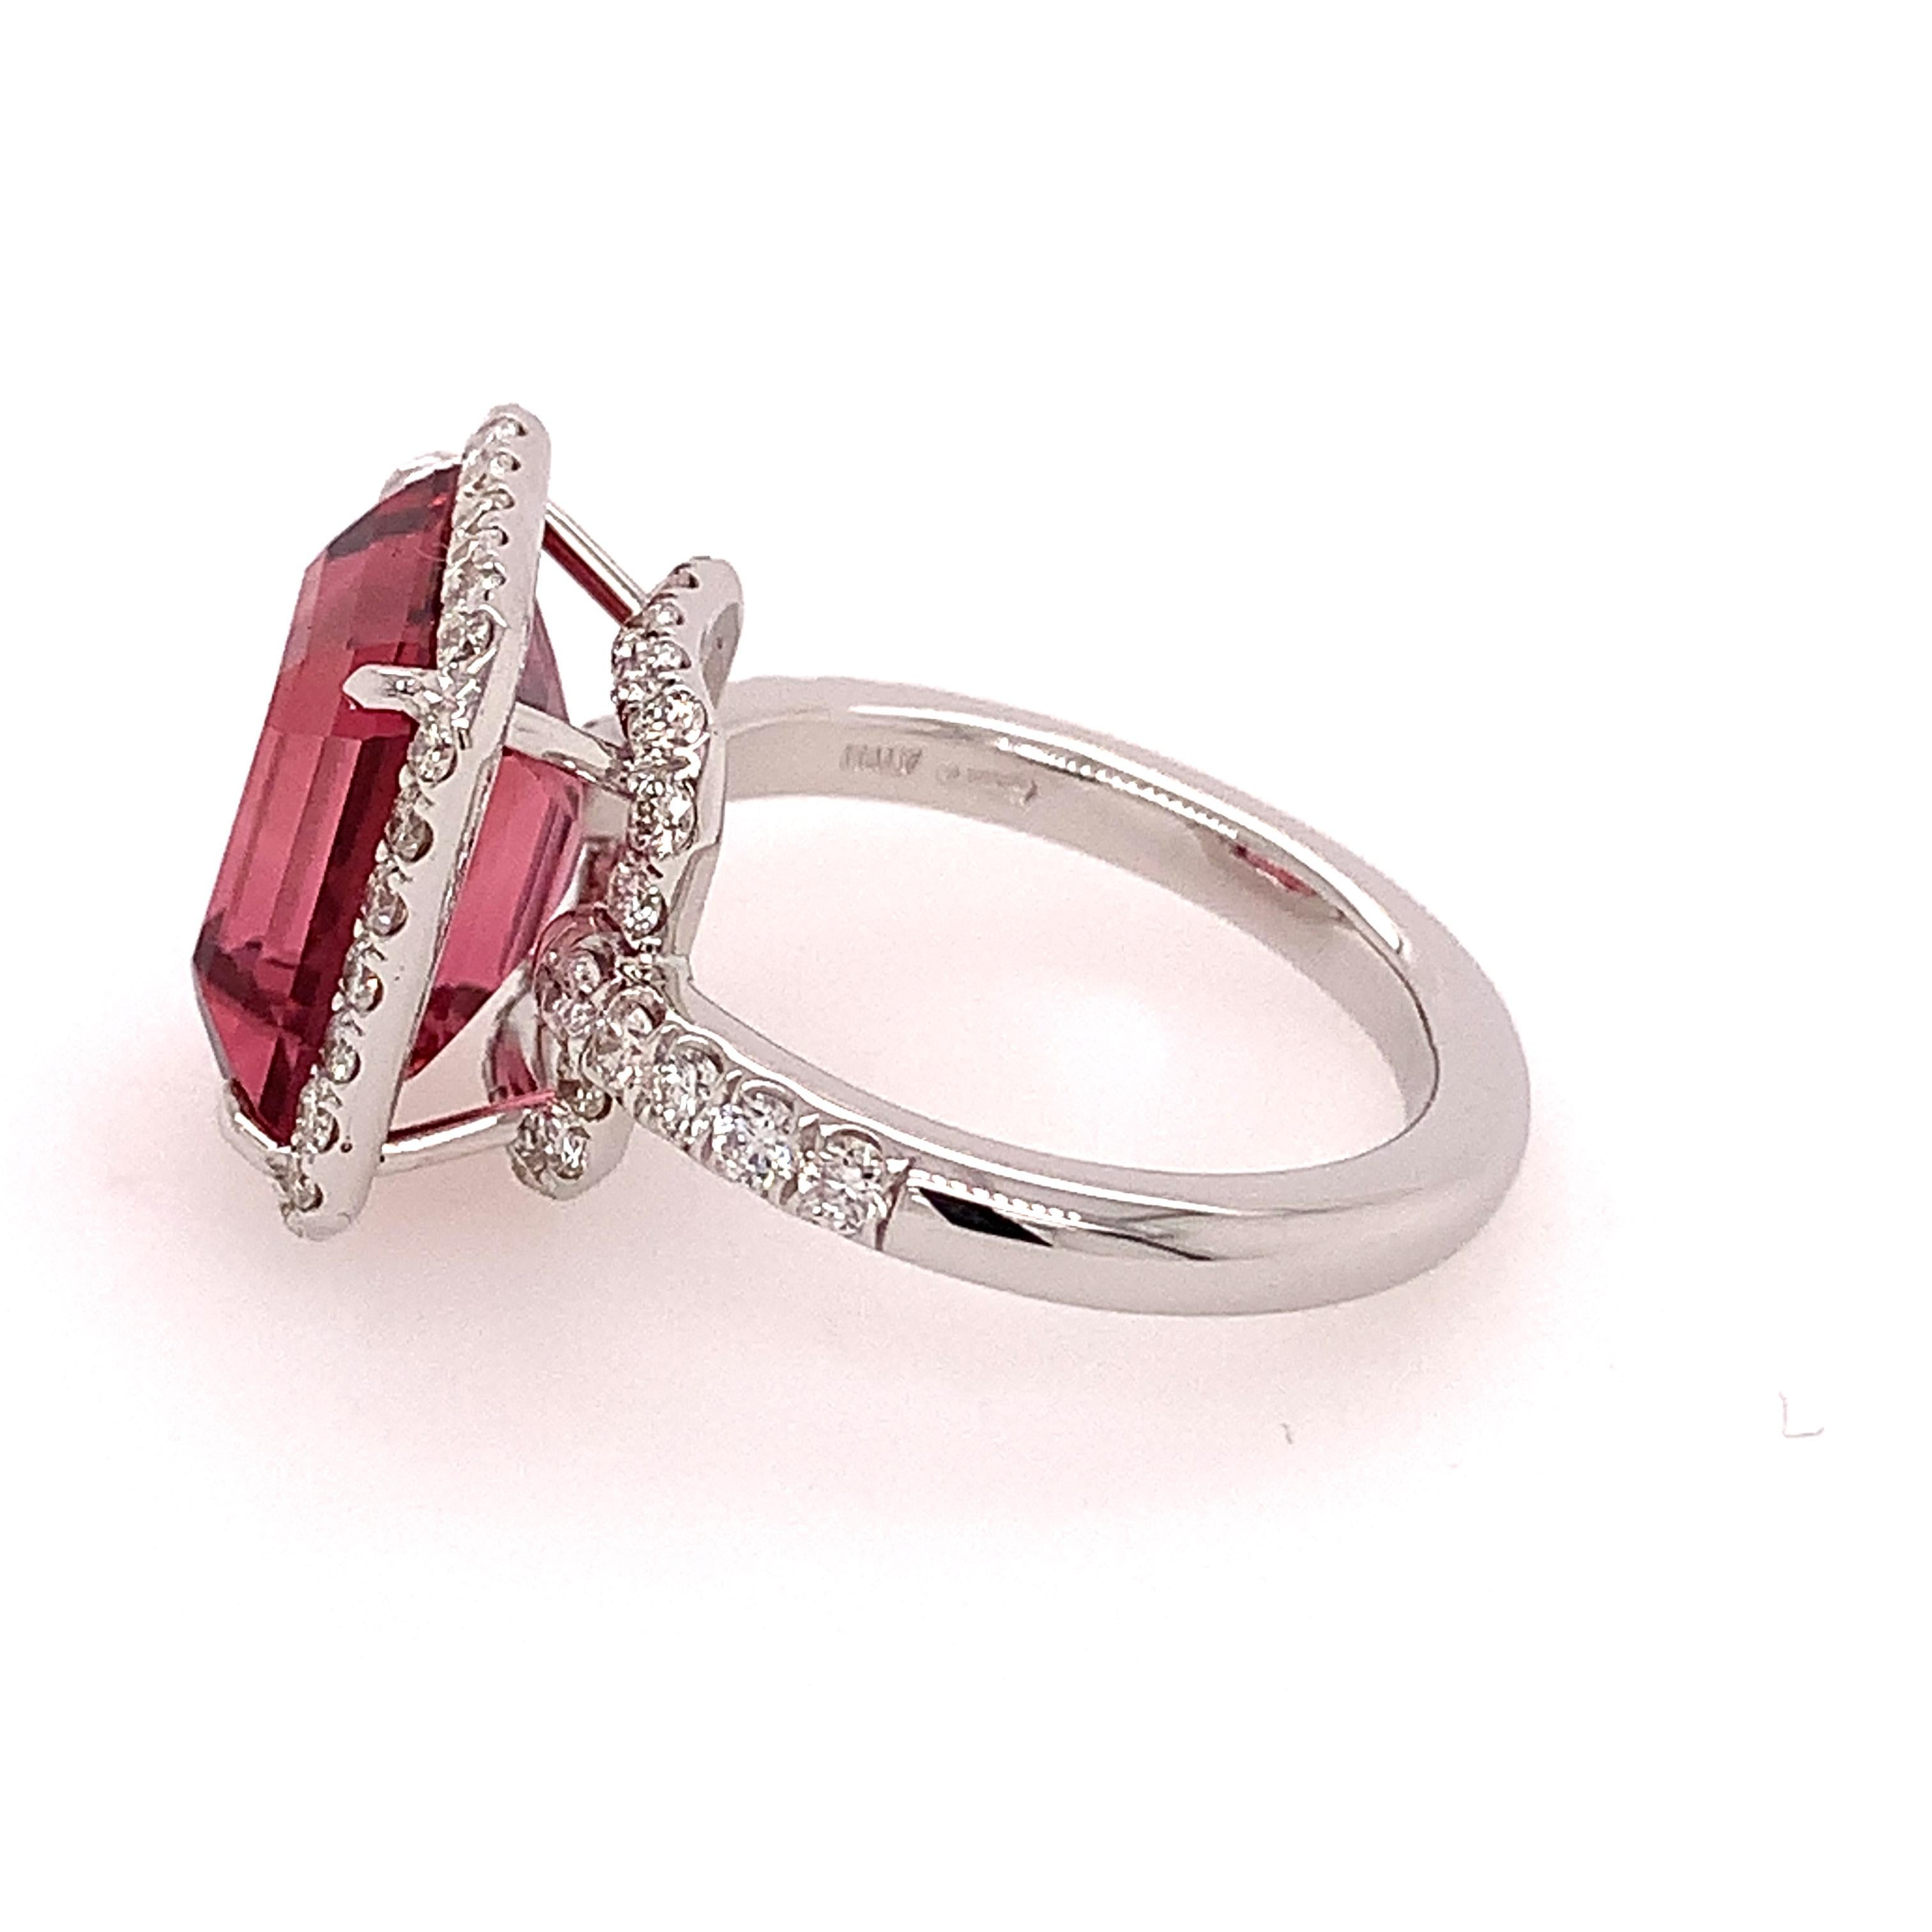 Modern 18kt White Gold One of A Kind Ring with Square Pink Tourmaline and Diamonds